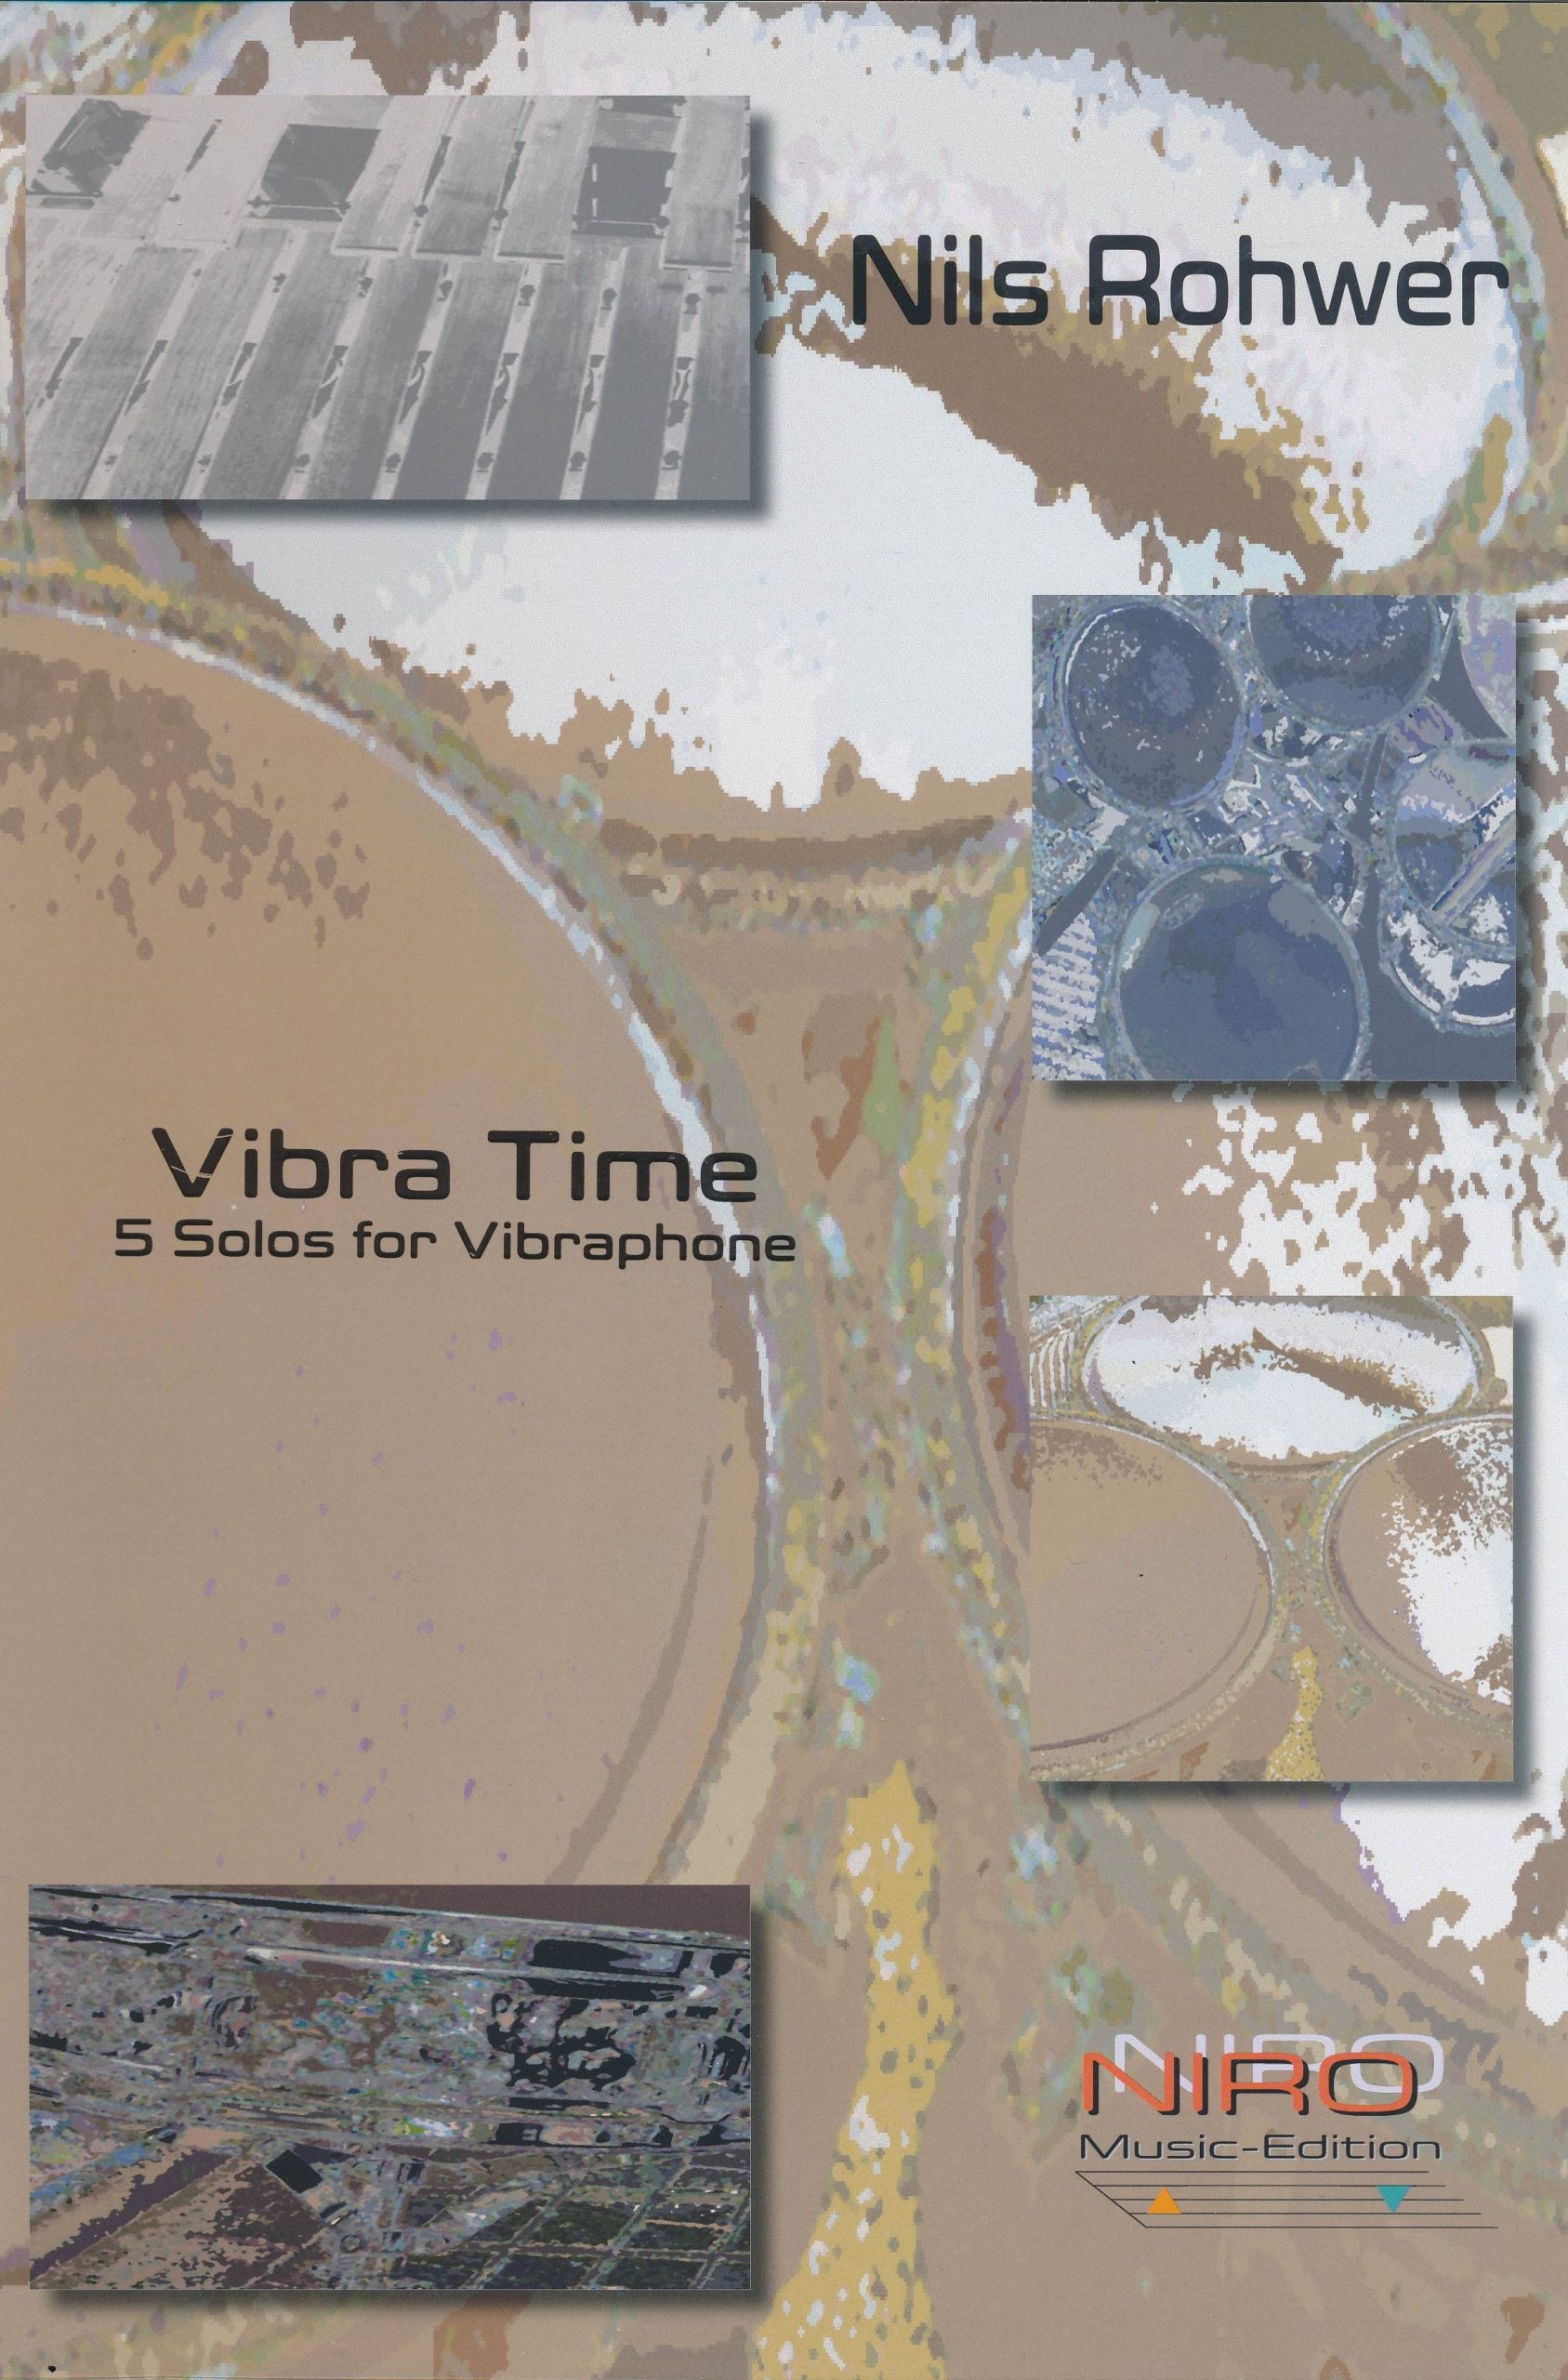 Vibra Time by Nils Rohwer